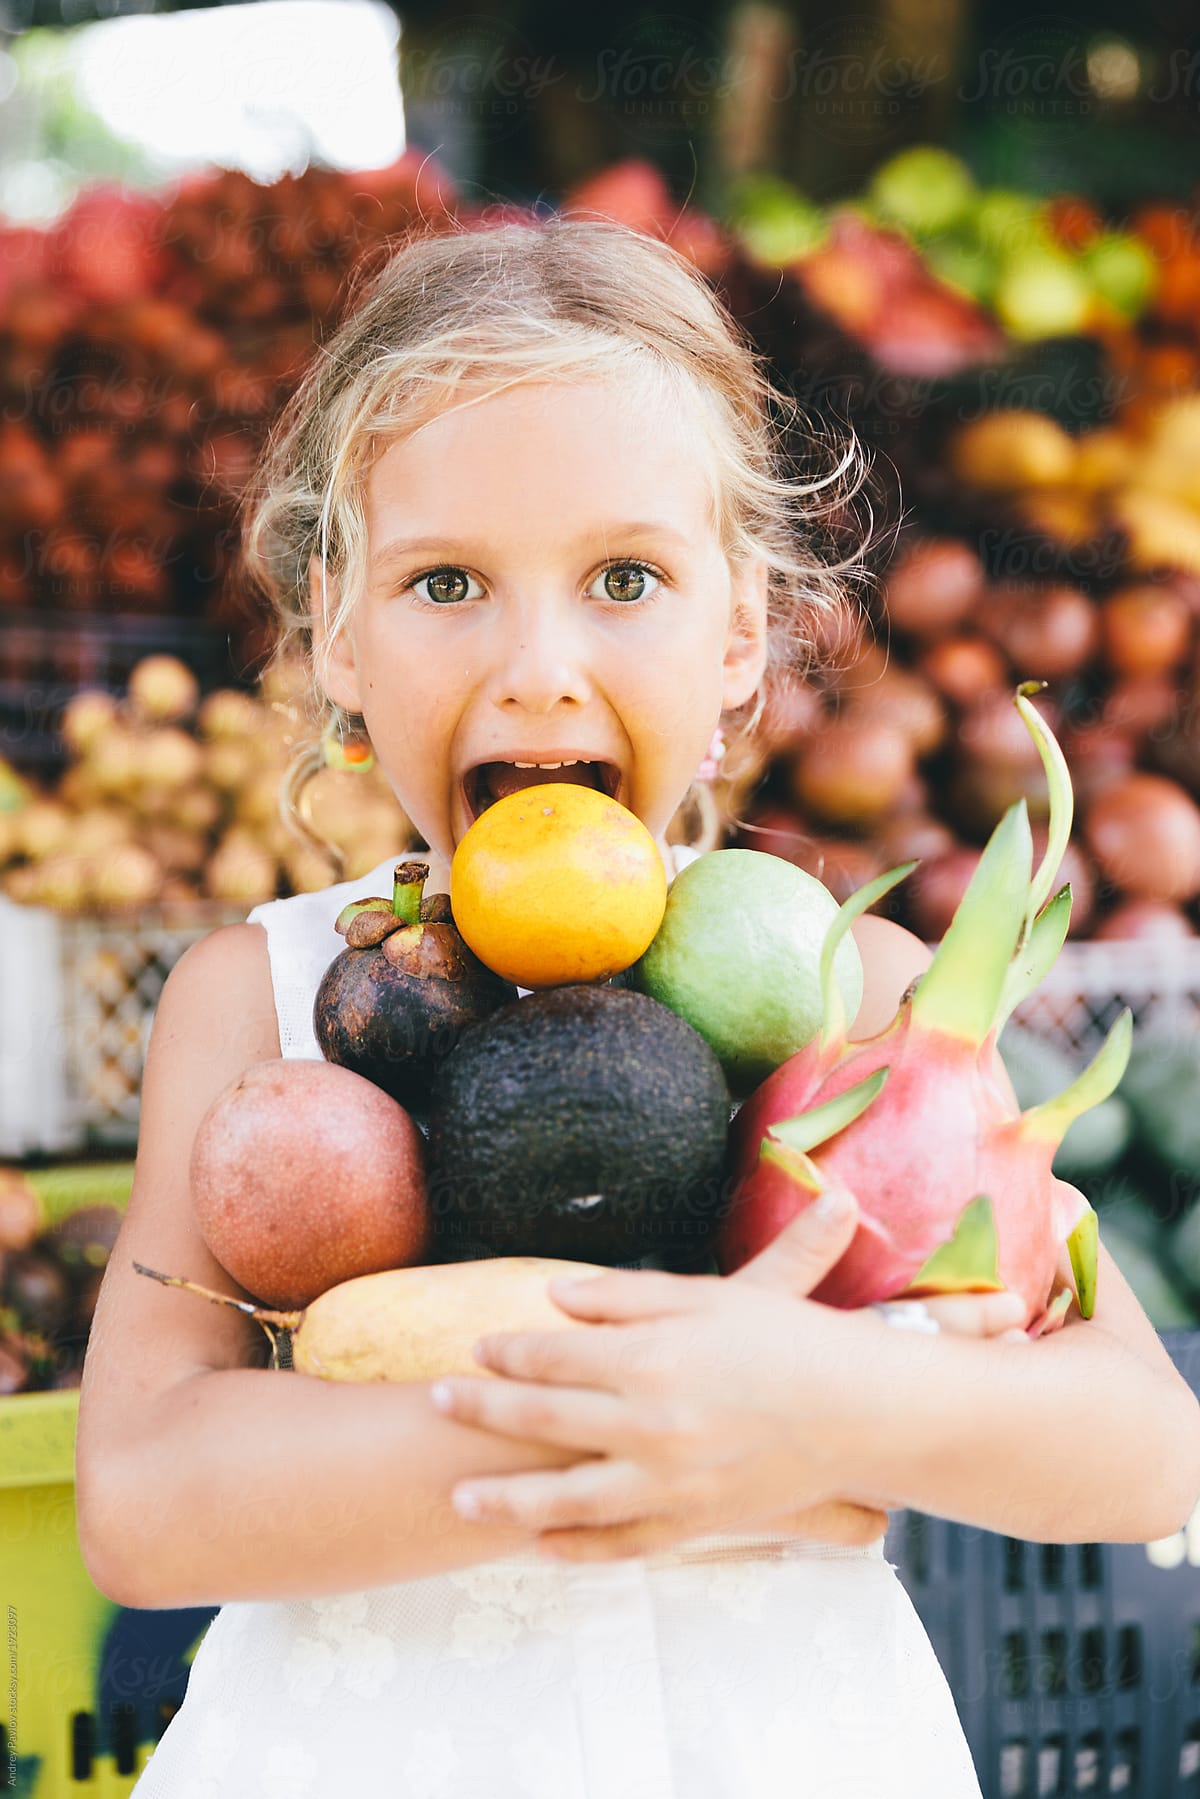 The child holding a bunch of fruits in the fruit store